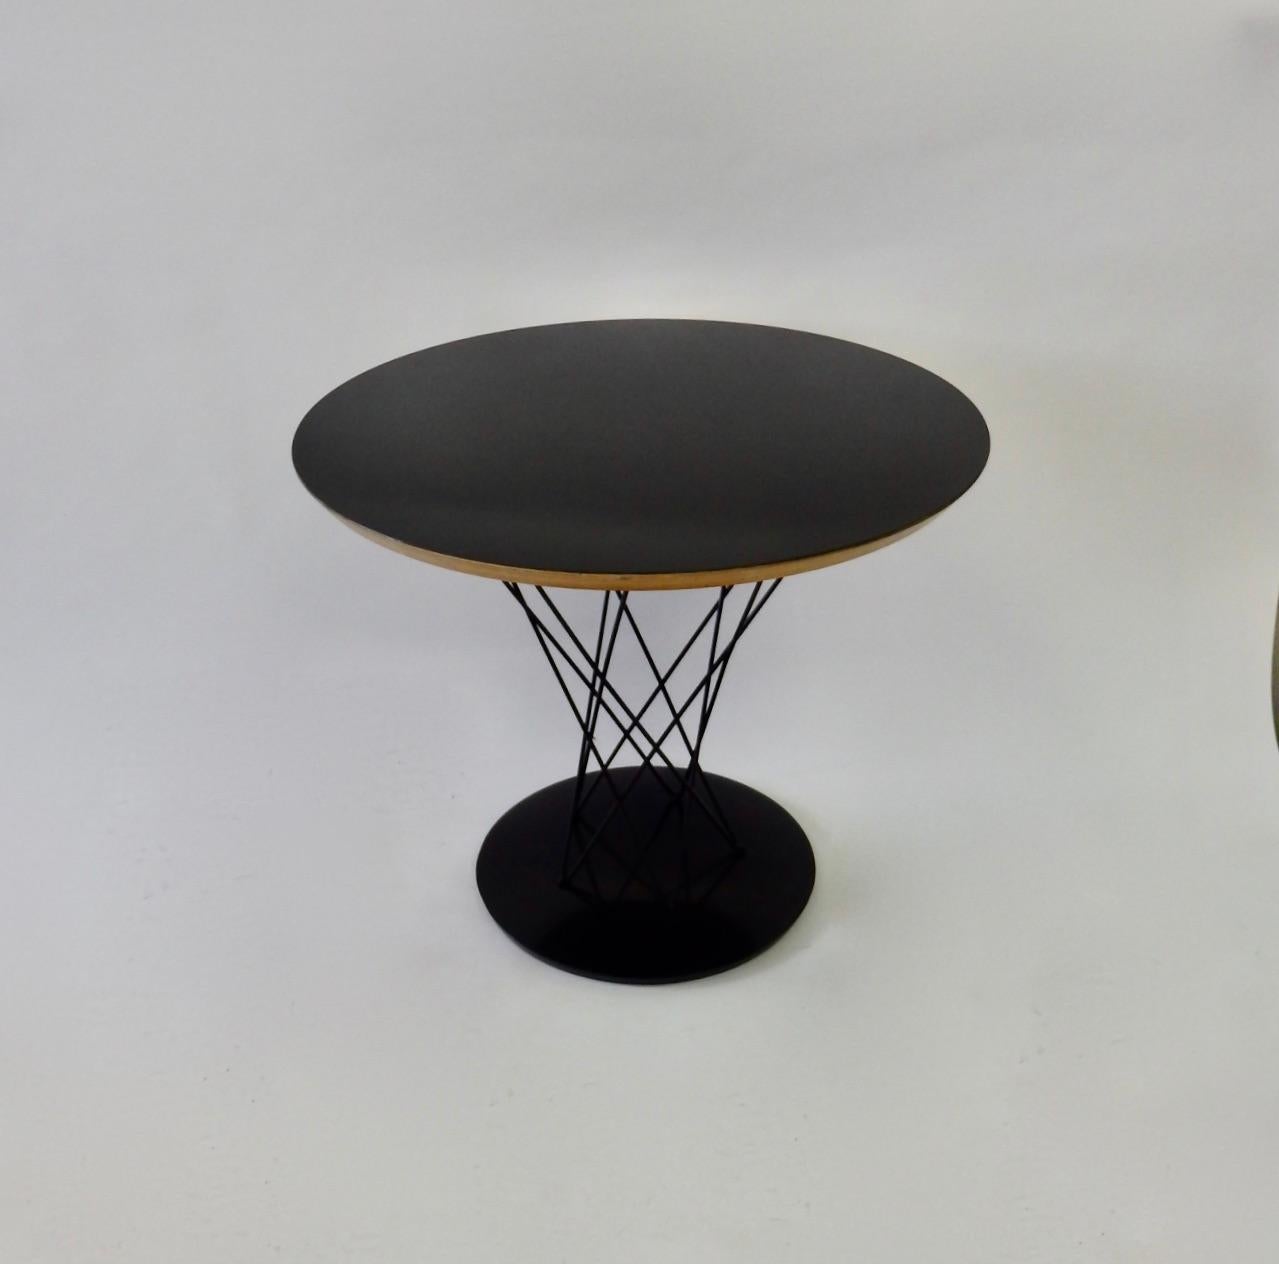 Cast Isamu Noguchi for Knoll Black Top Cyclone Side Table